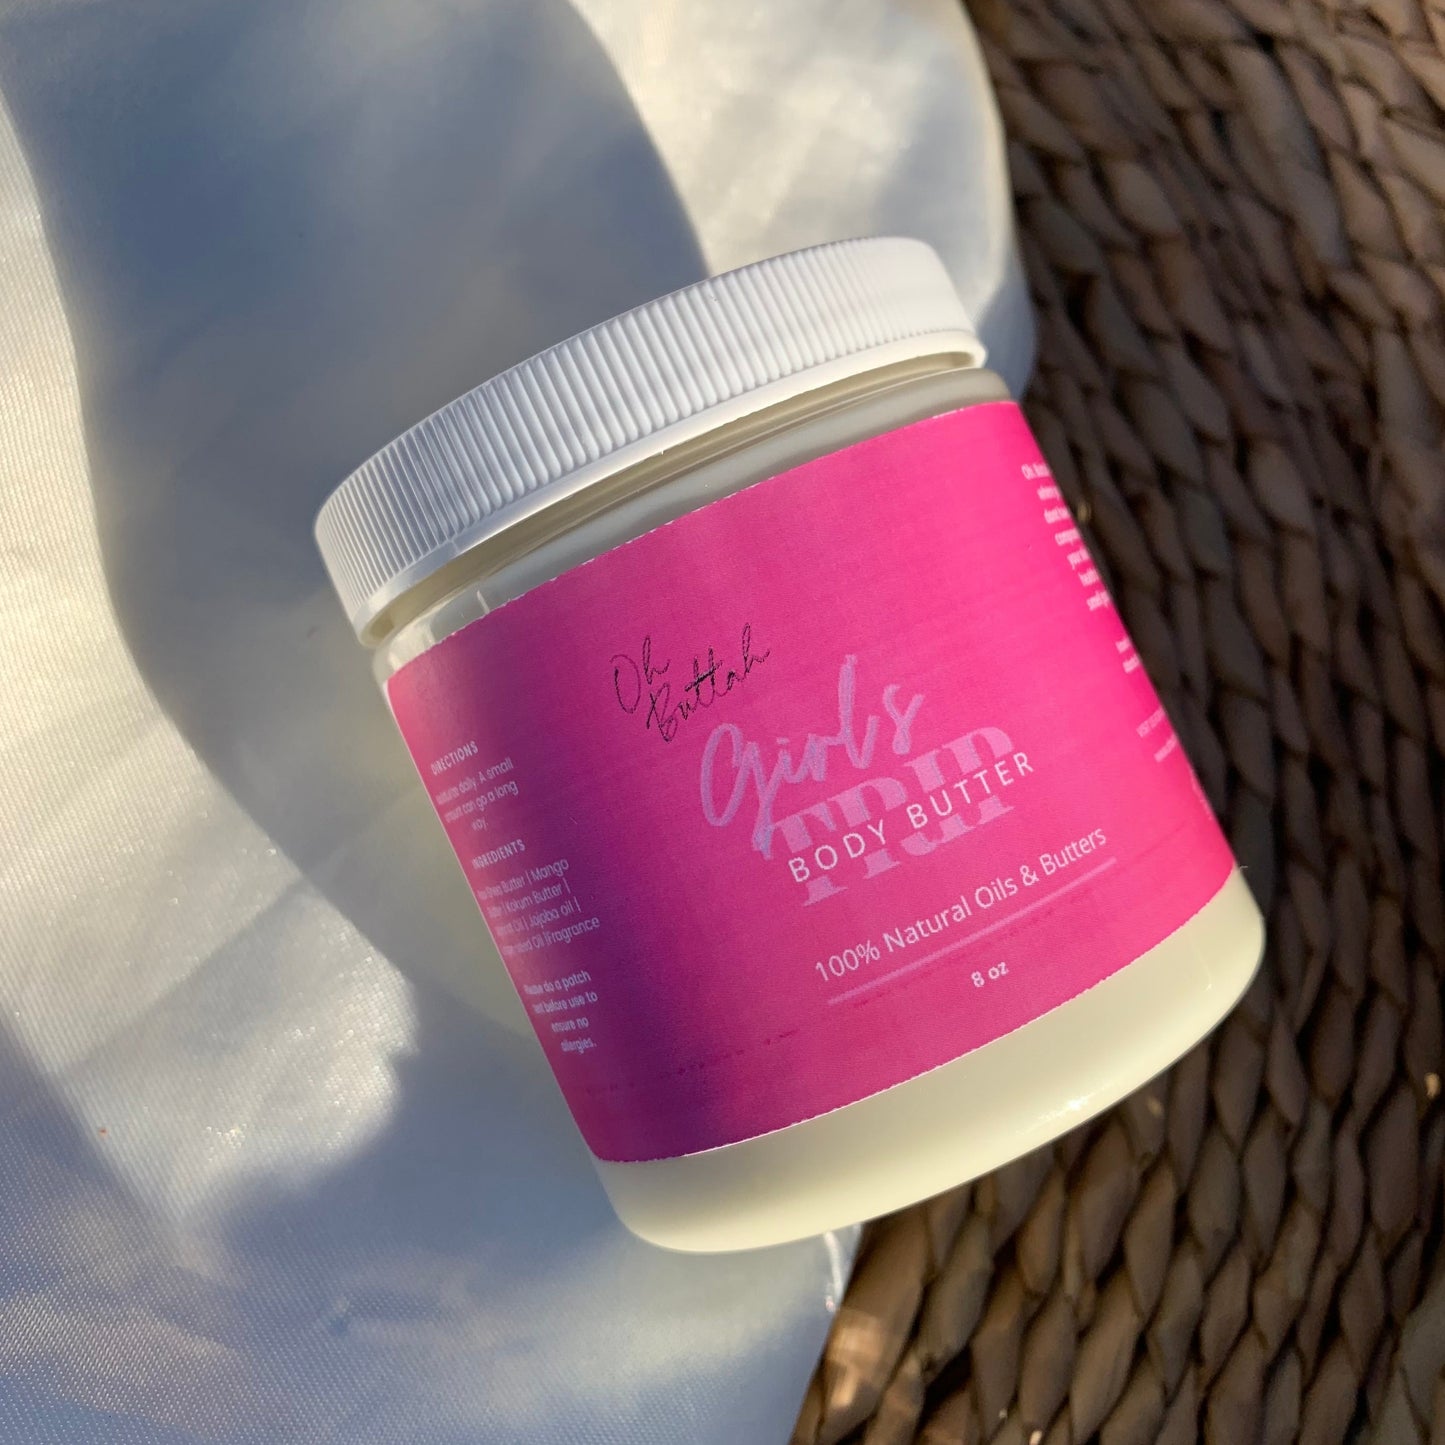 Girls Trip Scented Body Butter